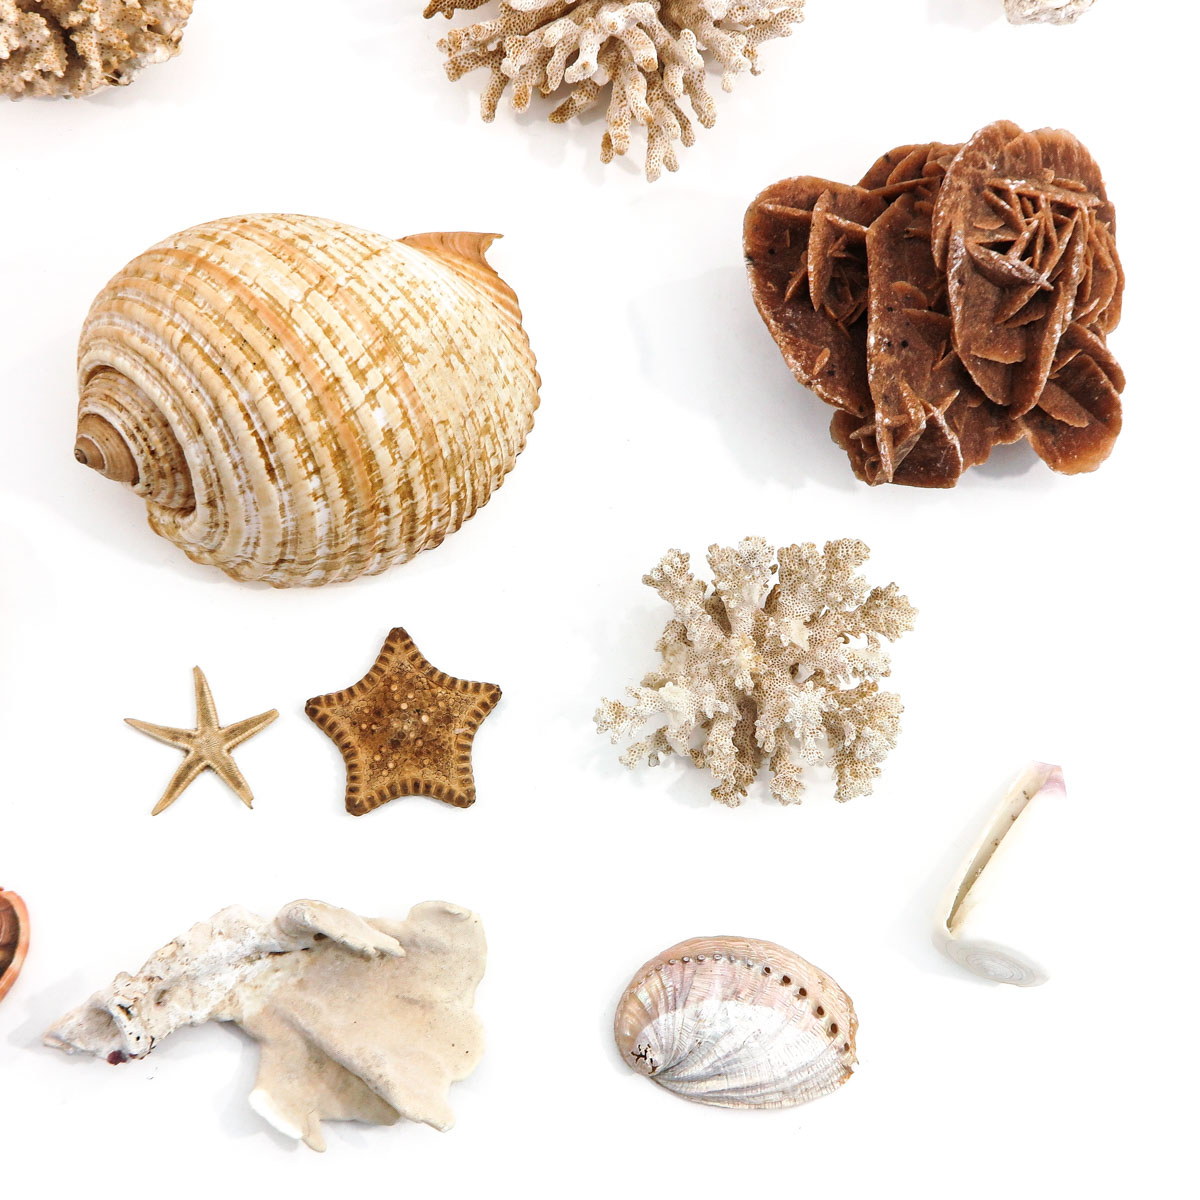 A Collection of Shells and Coral - Image 5 of 6